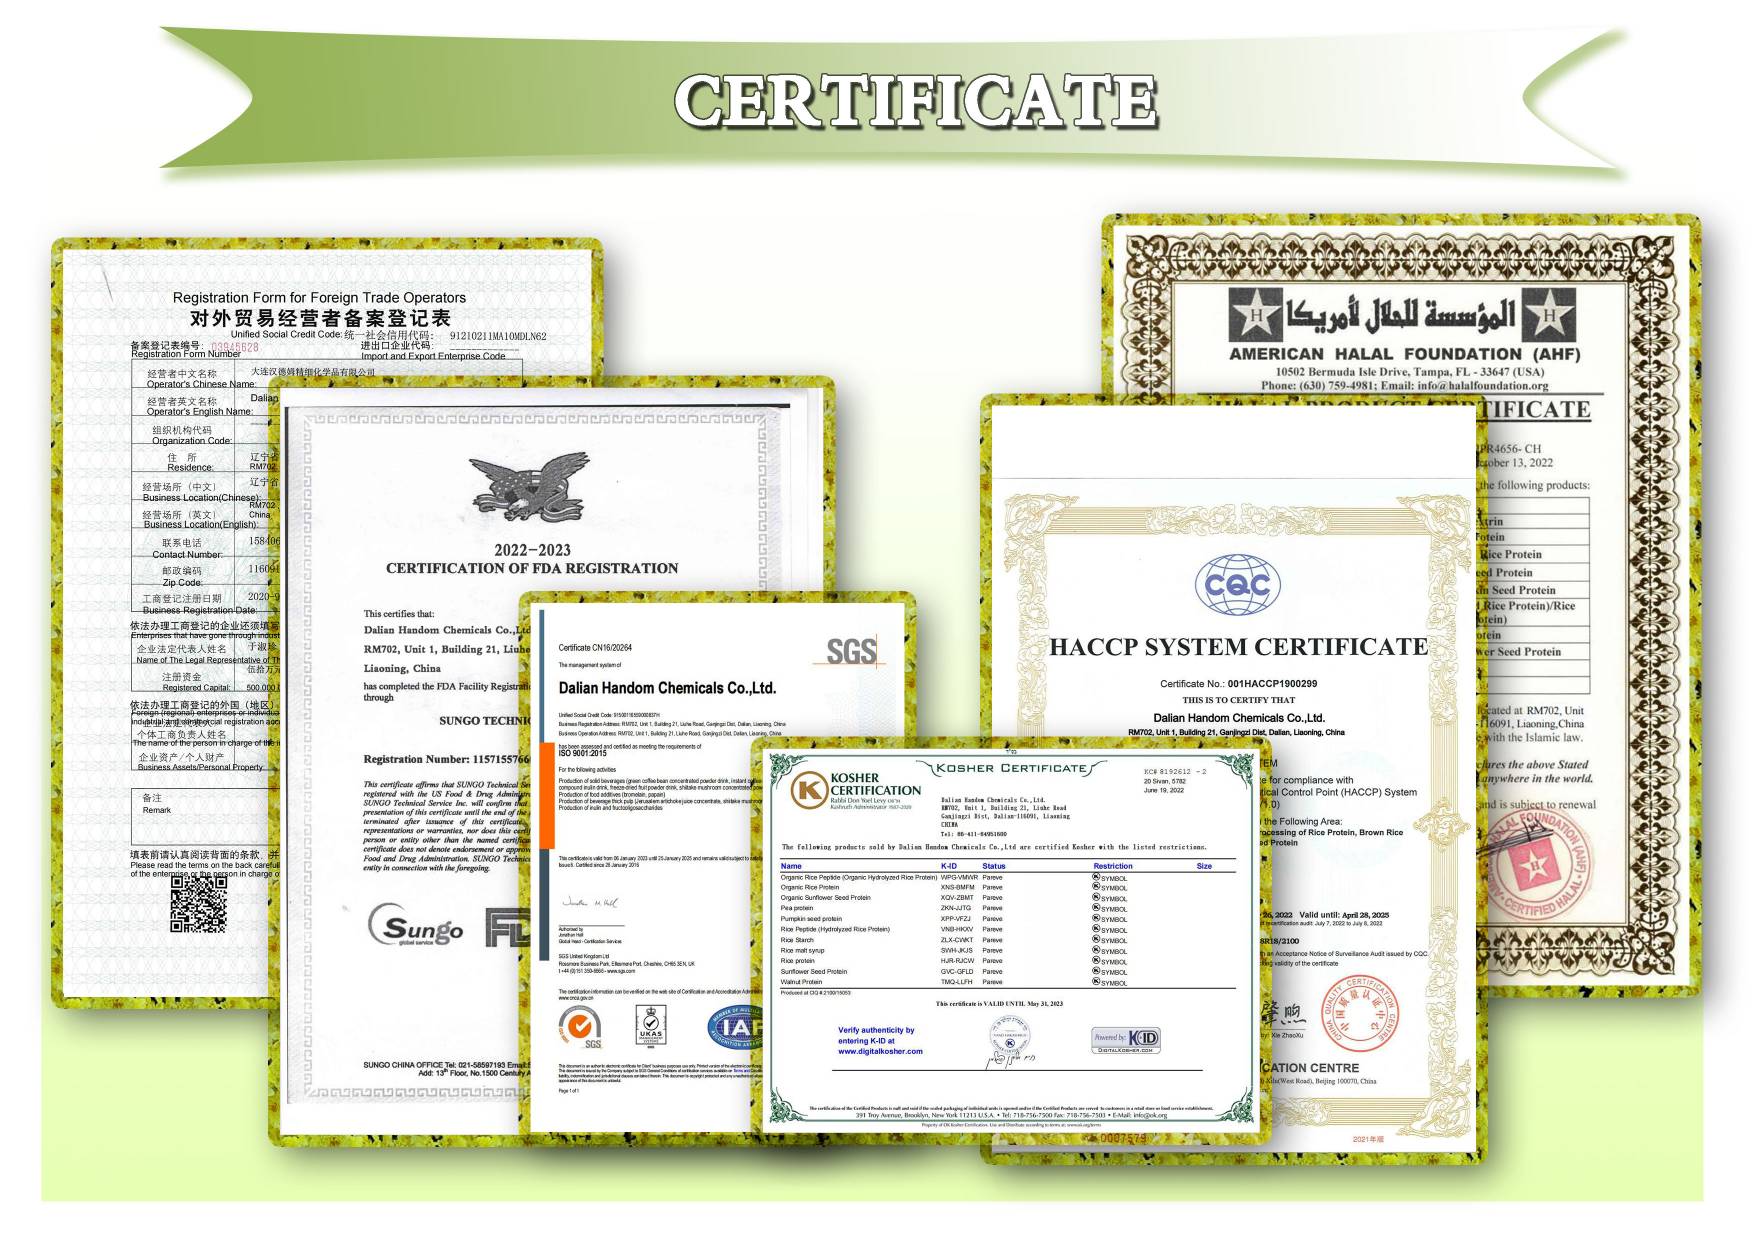 Our Certifications